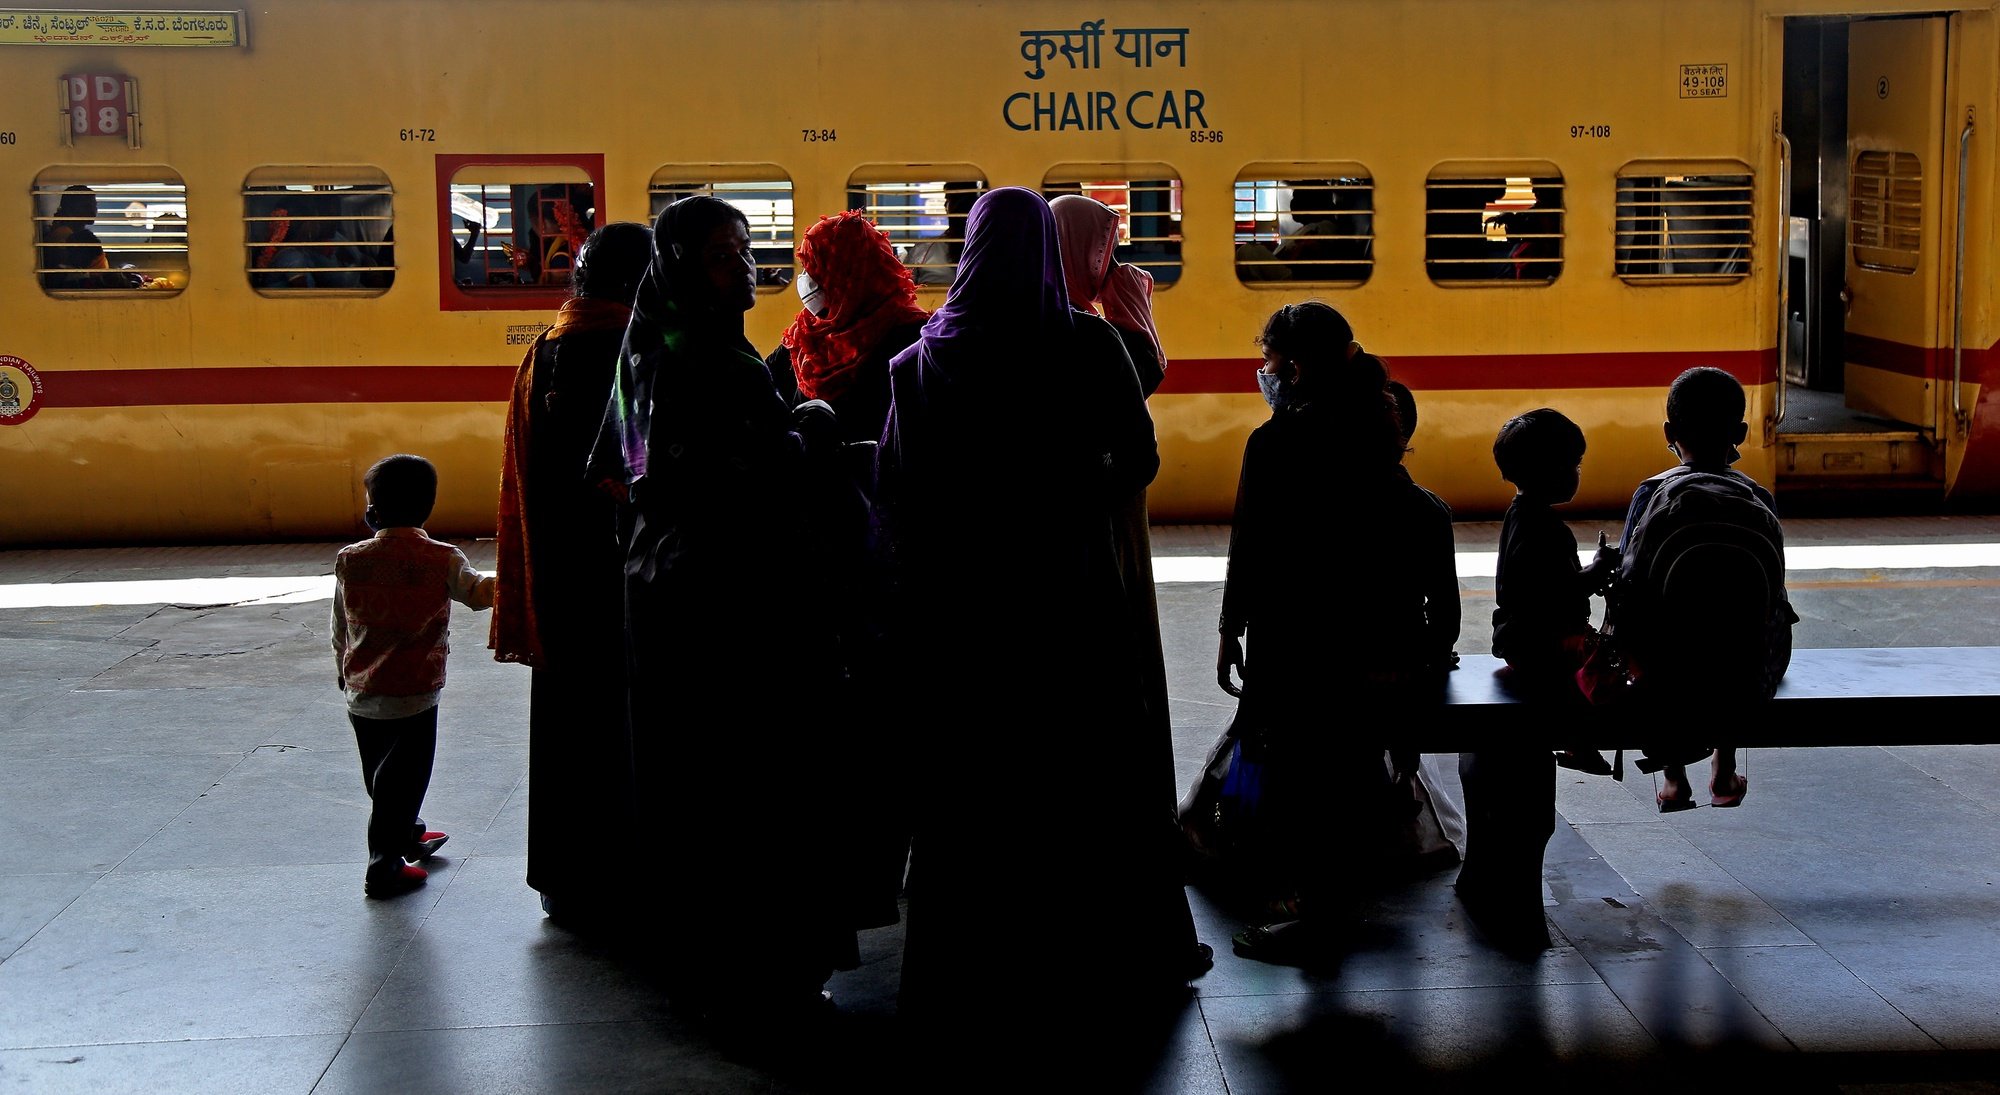 epa08979557 Commuters wait at the city railway station in Bangalore, India 01 February 2021. India union budget presented by the Union Finance Minister Nirmala Sitharaman her first paperless Union budget amid COVID19 pandemic making it the most significant budget to boost economic growth, a slew of measures on healthcare and infrastructure to give an impetus to the Covid-hit economy.  EPA/JAGADEESH NV